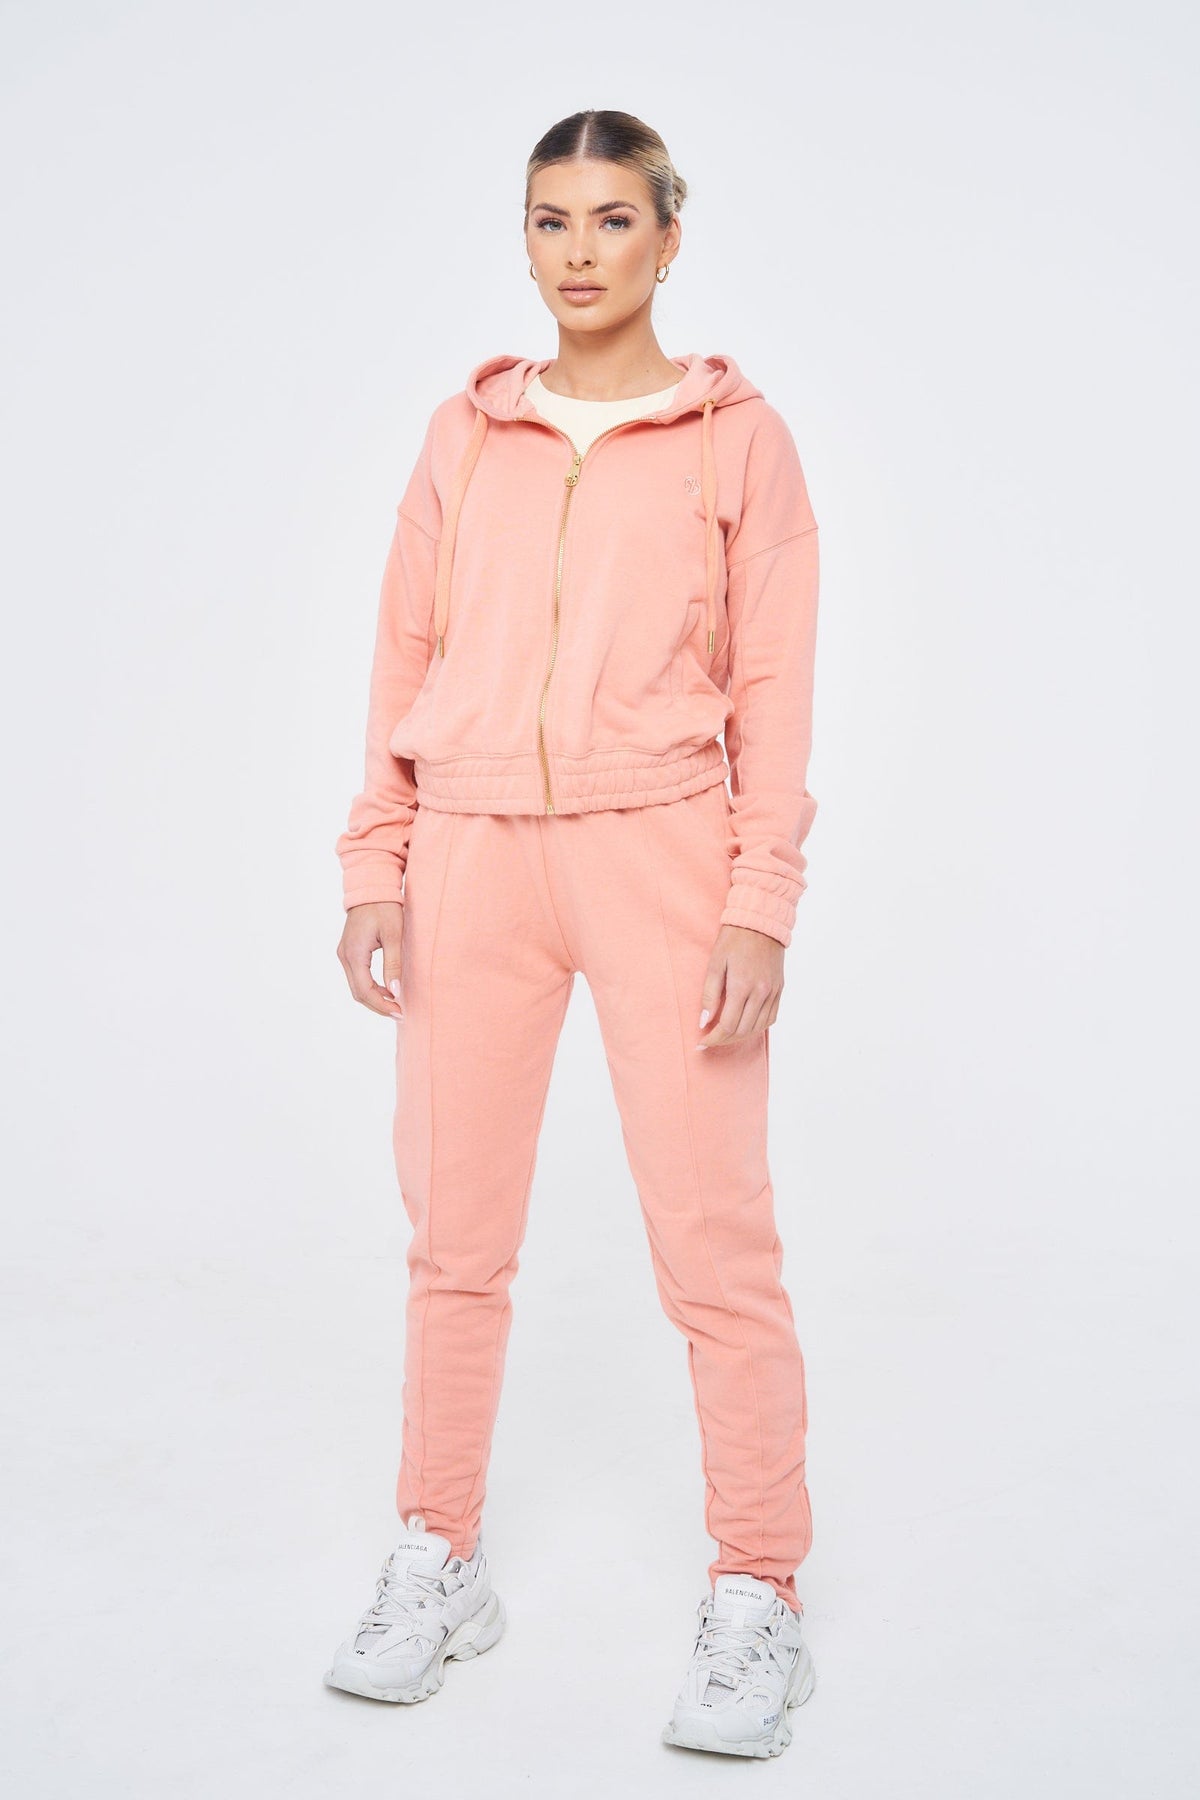 SIANMARIE Front Seam Joggers / Trackpants - Peach